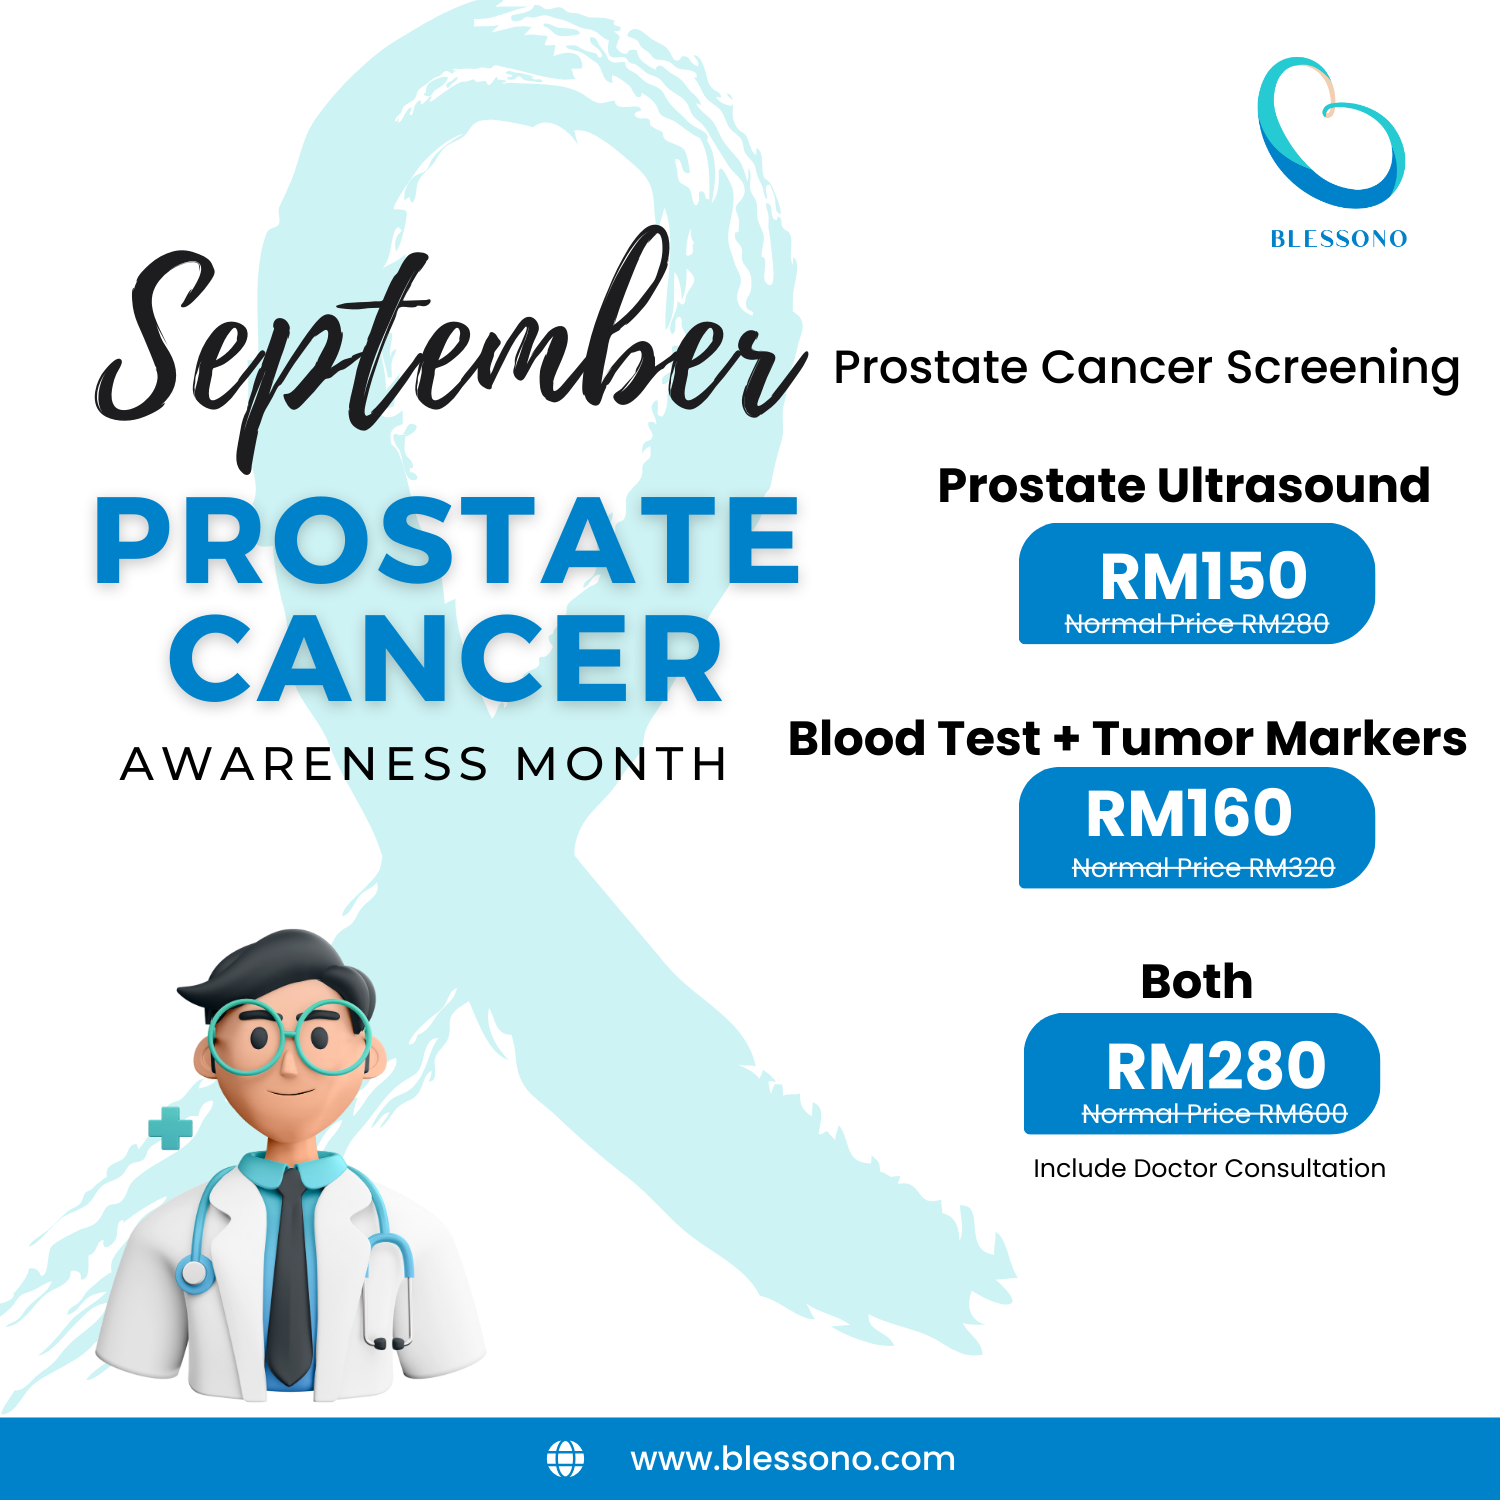 Prostate Cancer Screening Packages